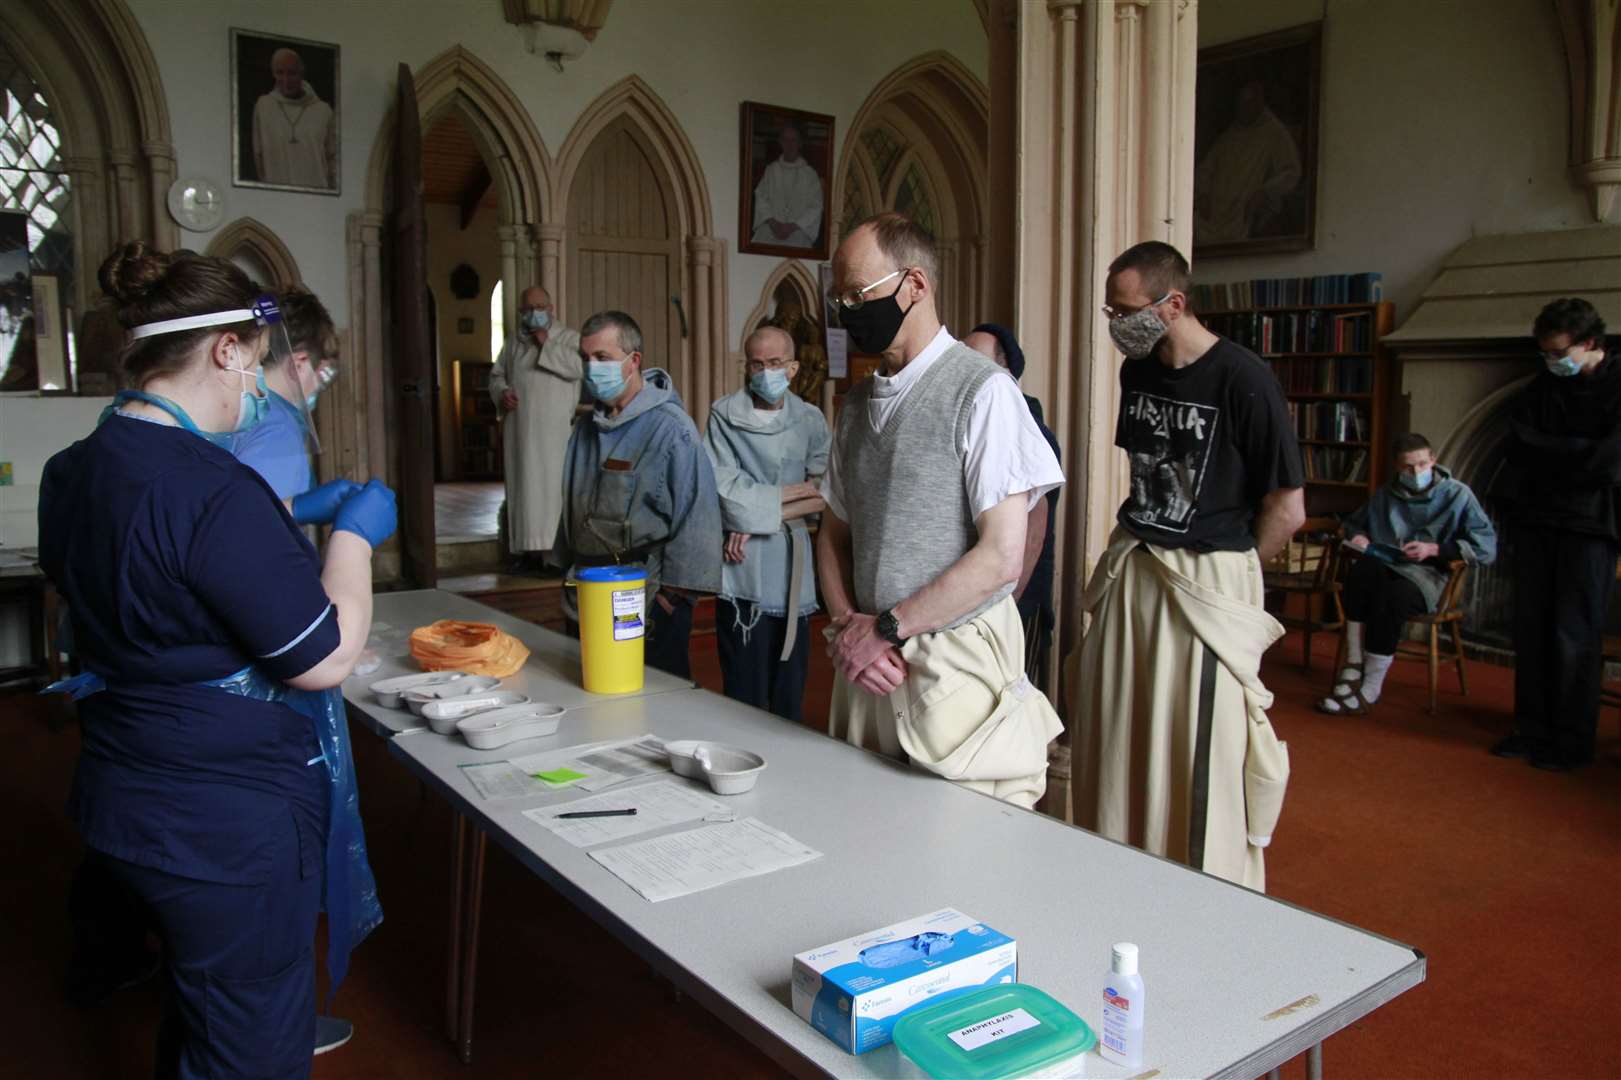 Monks lining up for their Covid-19 vaccinations at Pluscarden Abbey.